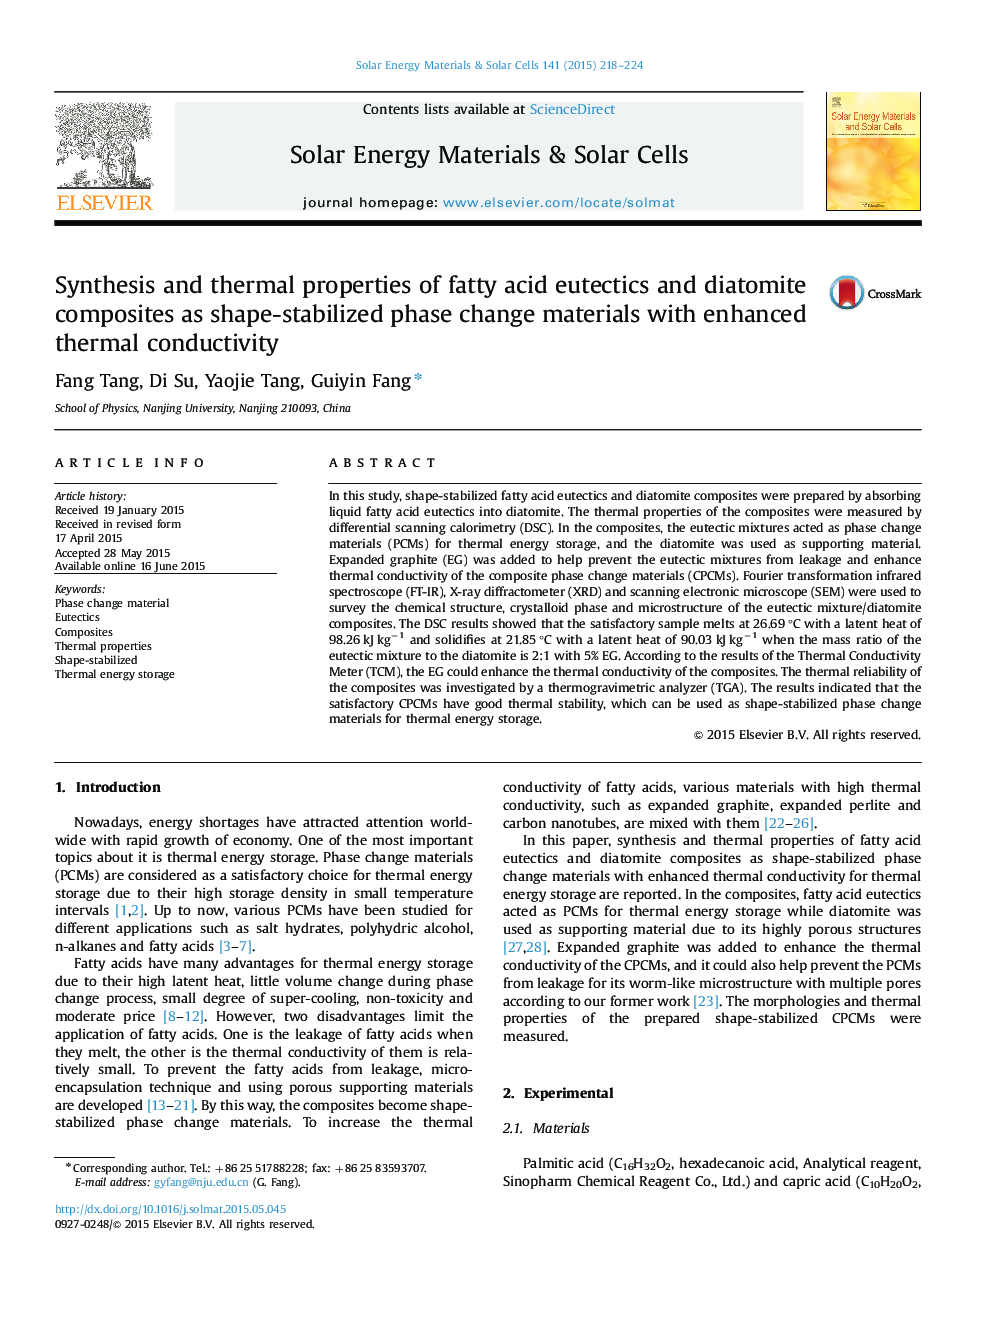 Synthesis and thermal properties of fatty acid eutectics and diatomite composites as shape-stabilized phase change materials with enhanced thermal conductivity